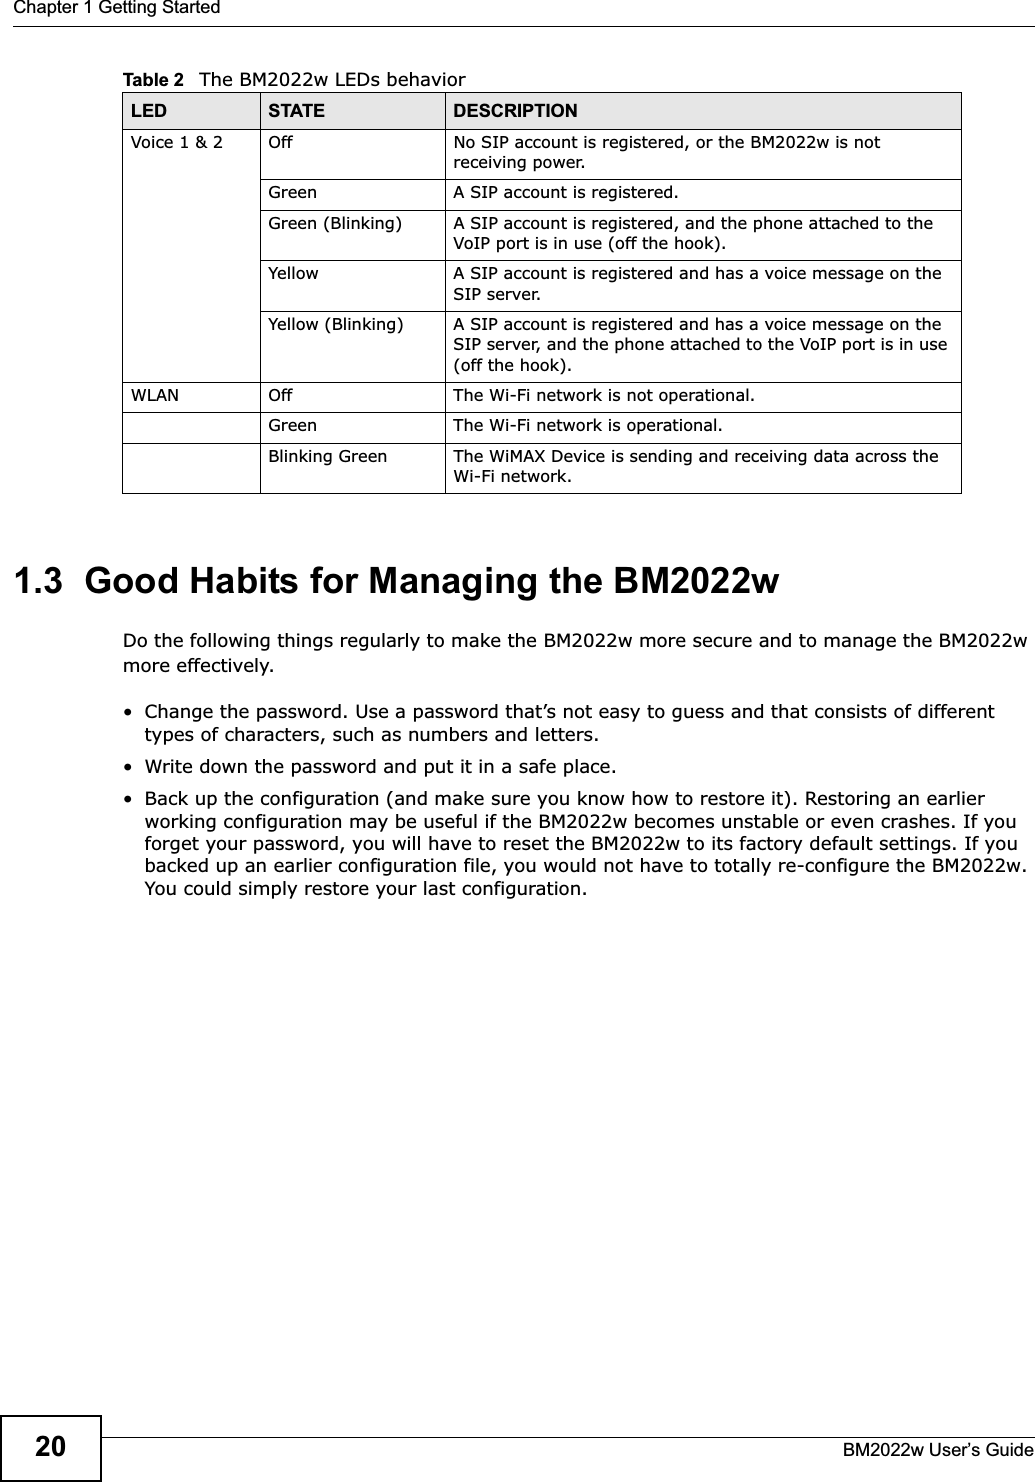 Chapter 1 Getting StartedBM2022w User’s Guide201.3  Good Habits for Managing the BM2022wDo the following things regularly to make the BM2022w more secure and to manage the BM2022w more effectively.• Change the password. Use a password that’s not easy to guess and that consists of different types of characters, such as numbers and letters.• Write down the password and put it in a safe place.• Back up the configuration (and make sure you know how to restore it). Restoring an earlier working configuration may be useful if the BM2022w becomes unstable or even crashes. If you forget your password, you will have to reset the BM2022w to its factory default settings. If you backed up an earlier configuration file, you would not have to totally re-configure the BM2022w. You could simply restore your last configuration.Voice 1 &amp; 2 Off No SIP account is registered, or the BM2022w is not receiving power.Green A SIP account is registered.Green (Blinking) A SIP account is registered, and the phone attached to the VoIP port is in use (off the hook).Yellow A SIP account is registered and has a voice message on the SIP server.Yellow (Blinking) A SIP account is registered and has a voice message on the SIP server, and the phone attached to the VoIP port is in use (off the hook).WLAN Off The Wi-Fi network is not operational.Green The Wi-Fi network is operational.Blinking Green The WiMAX Device is sending and receiving data across the Wi-Fi network.Table 2   The BM2022w LEDs behaviorLED STATE DESCRIPTION